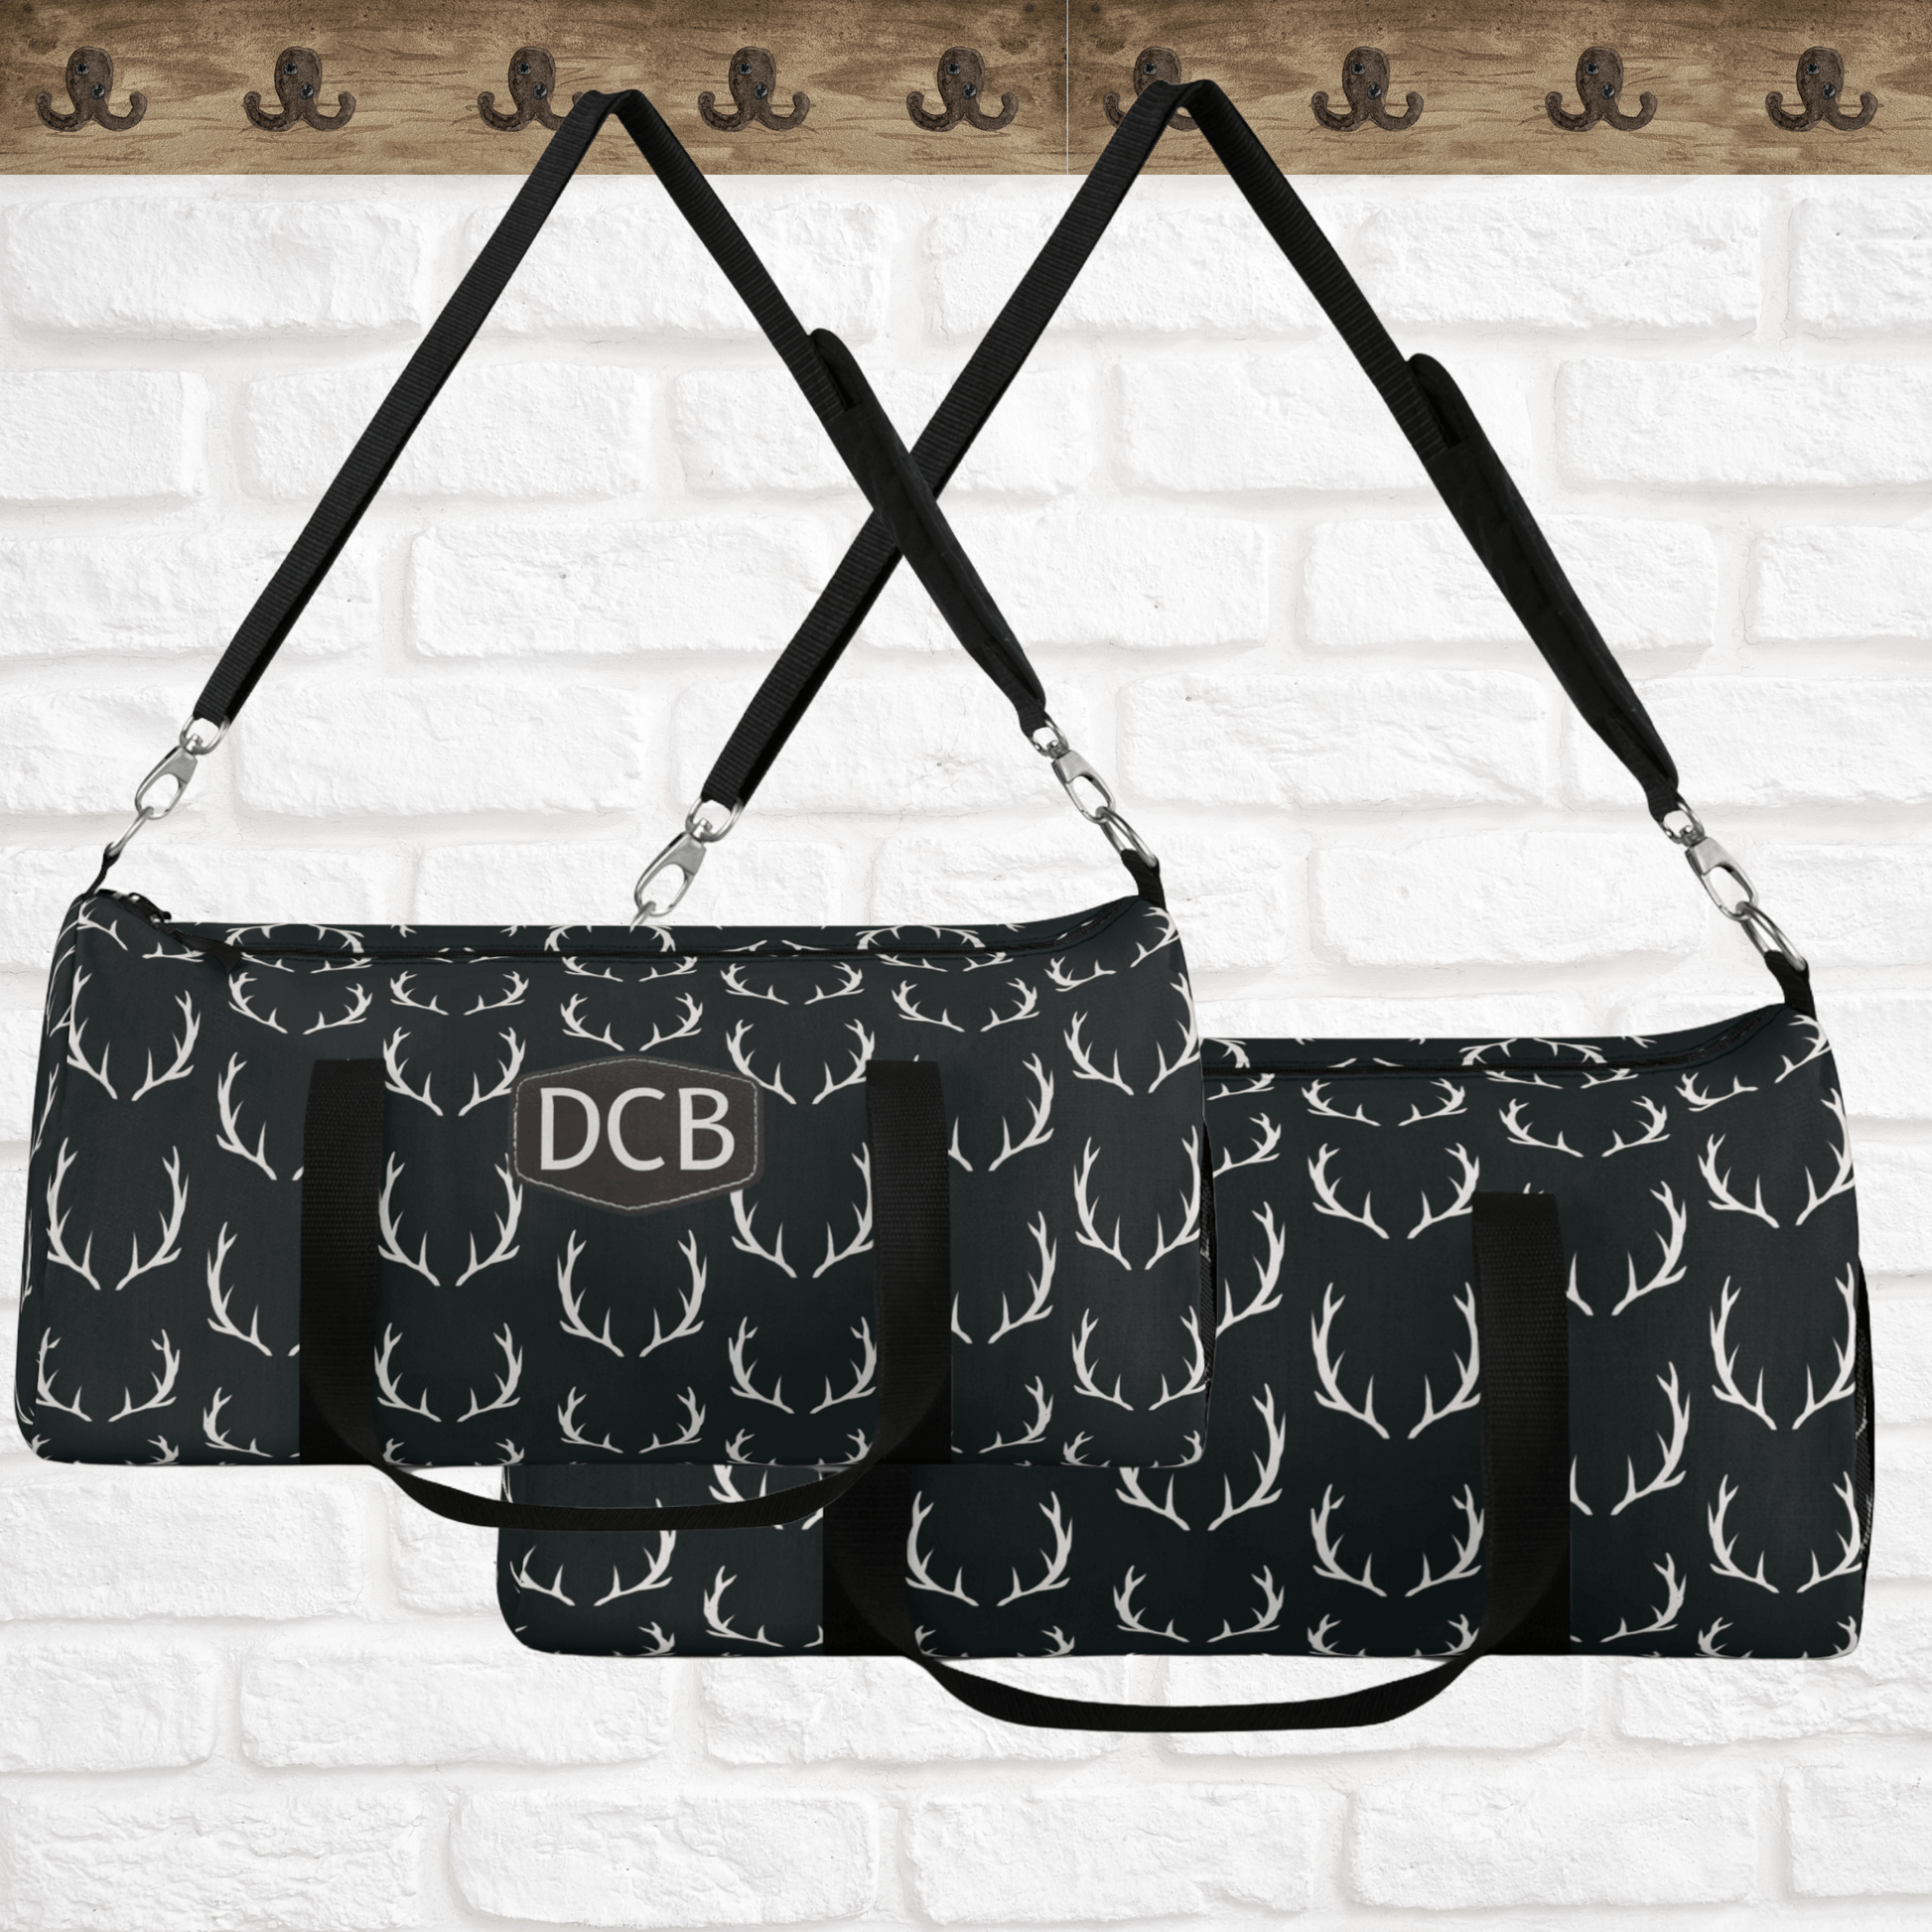 Our deer antler designer weekend bag makes the perfect gift for hunters or fathers day. This black duffel bag is shown in large or small size and can be monogrammed or enjoyed plain.